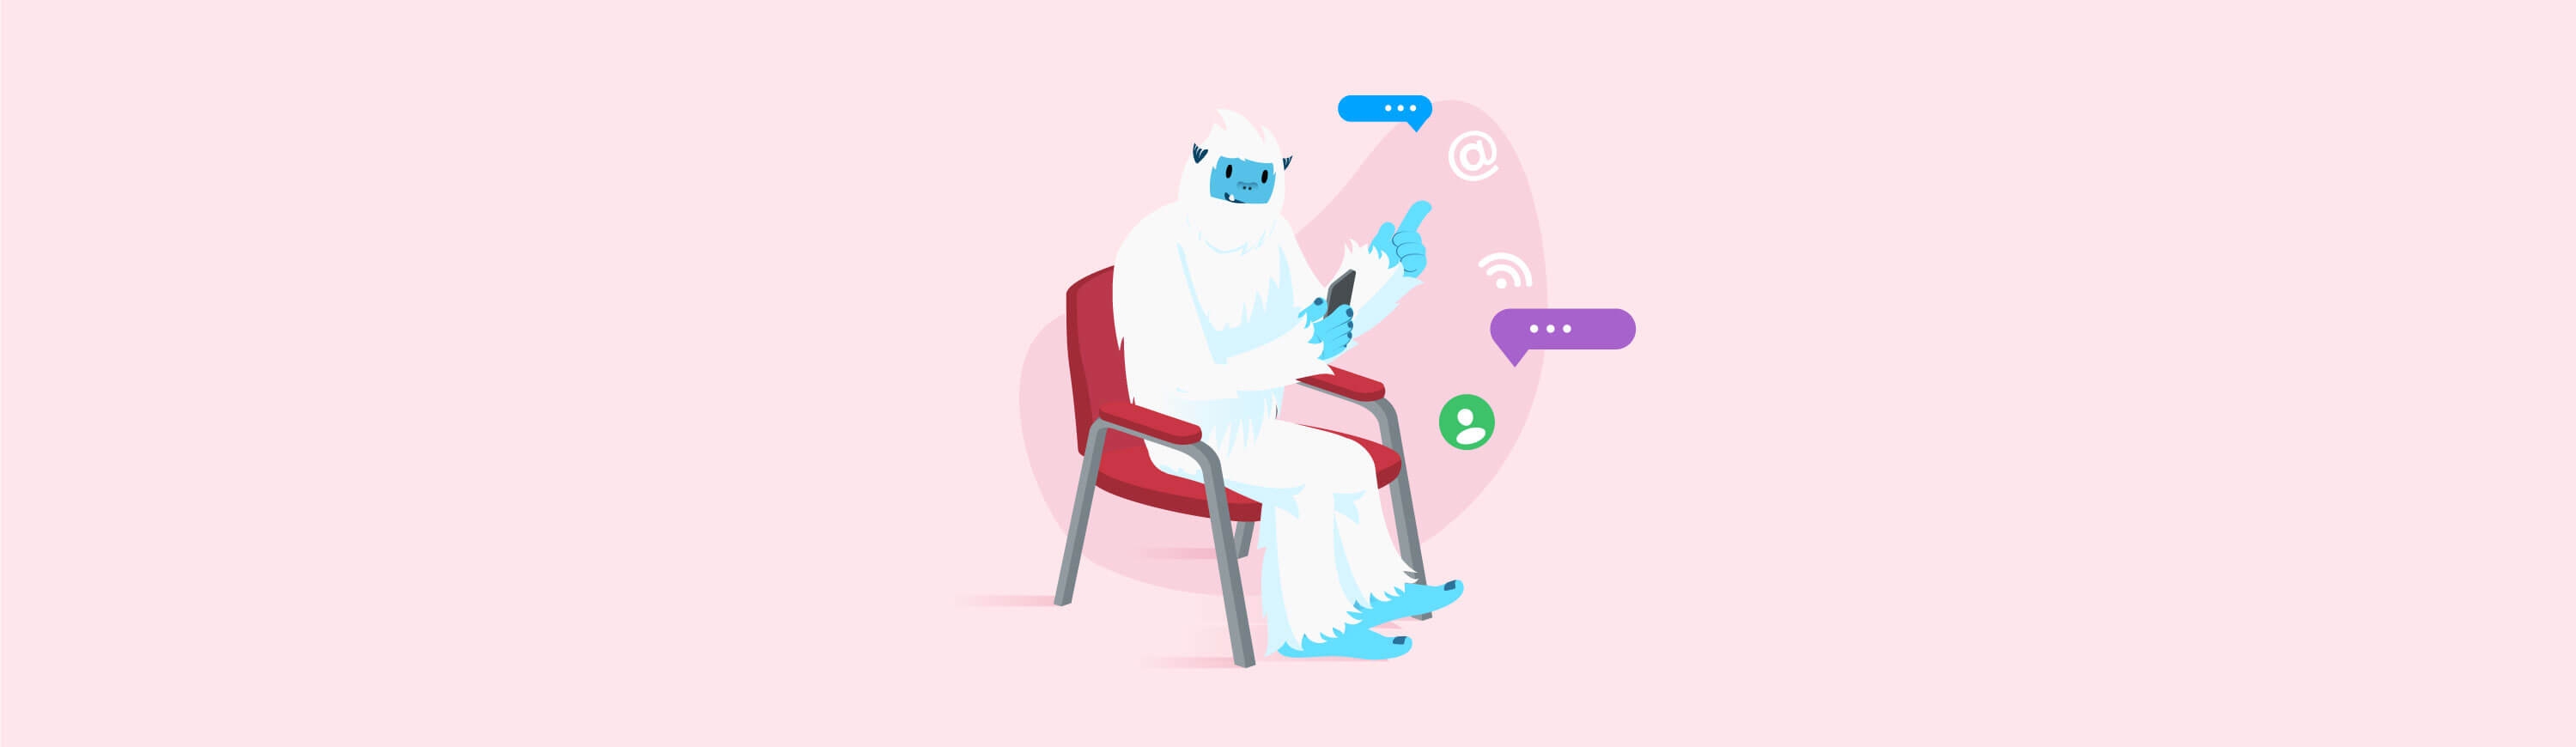 Illustration of Carl the yeti sititng in a chair and on social media.